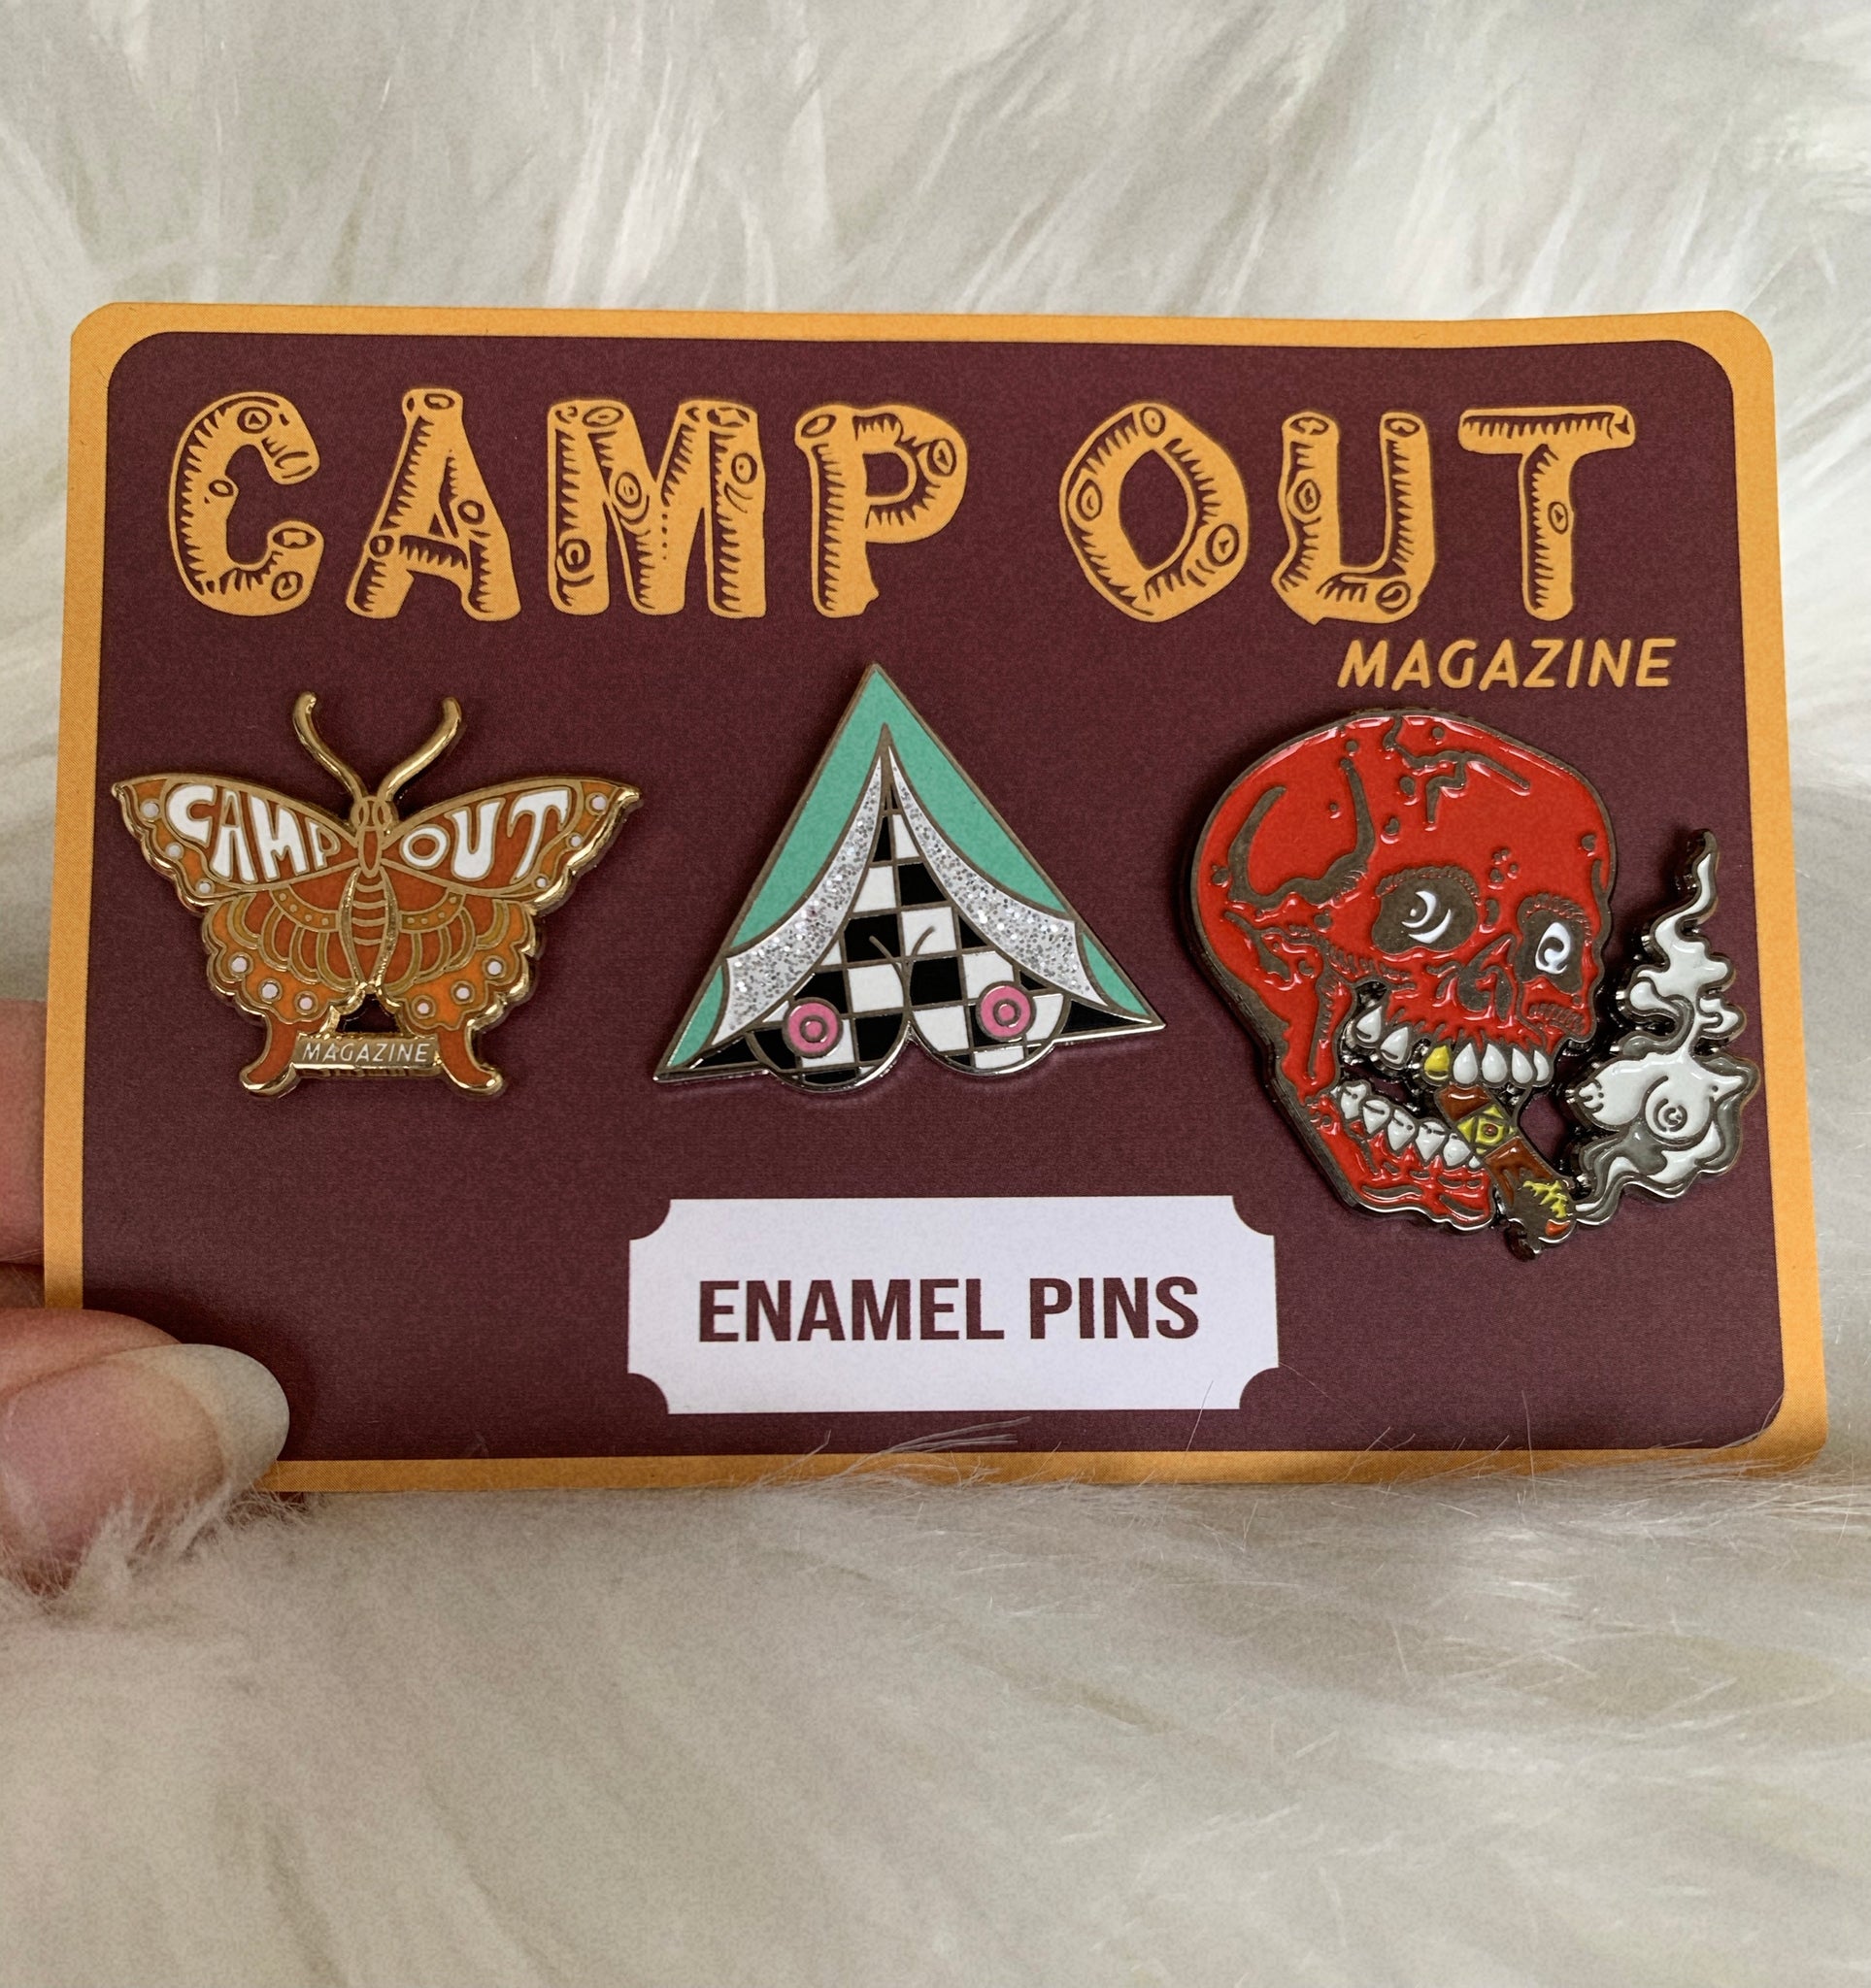 Camp Out Enamel Pin Pack